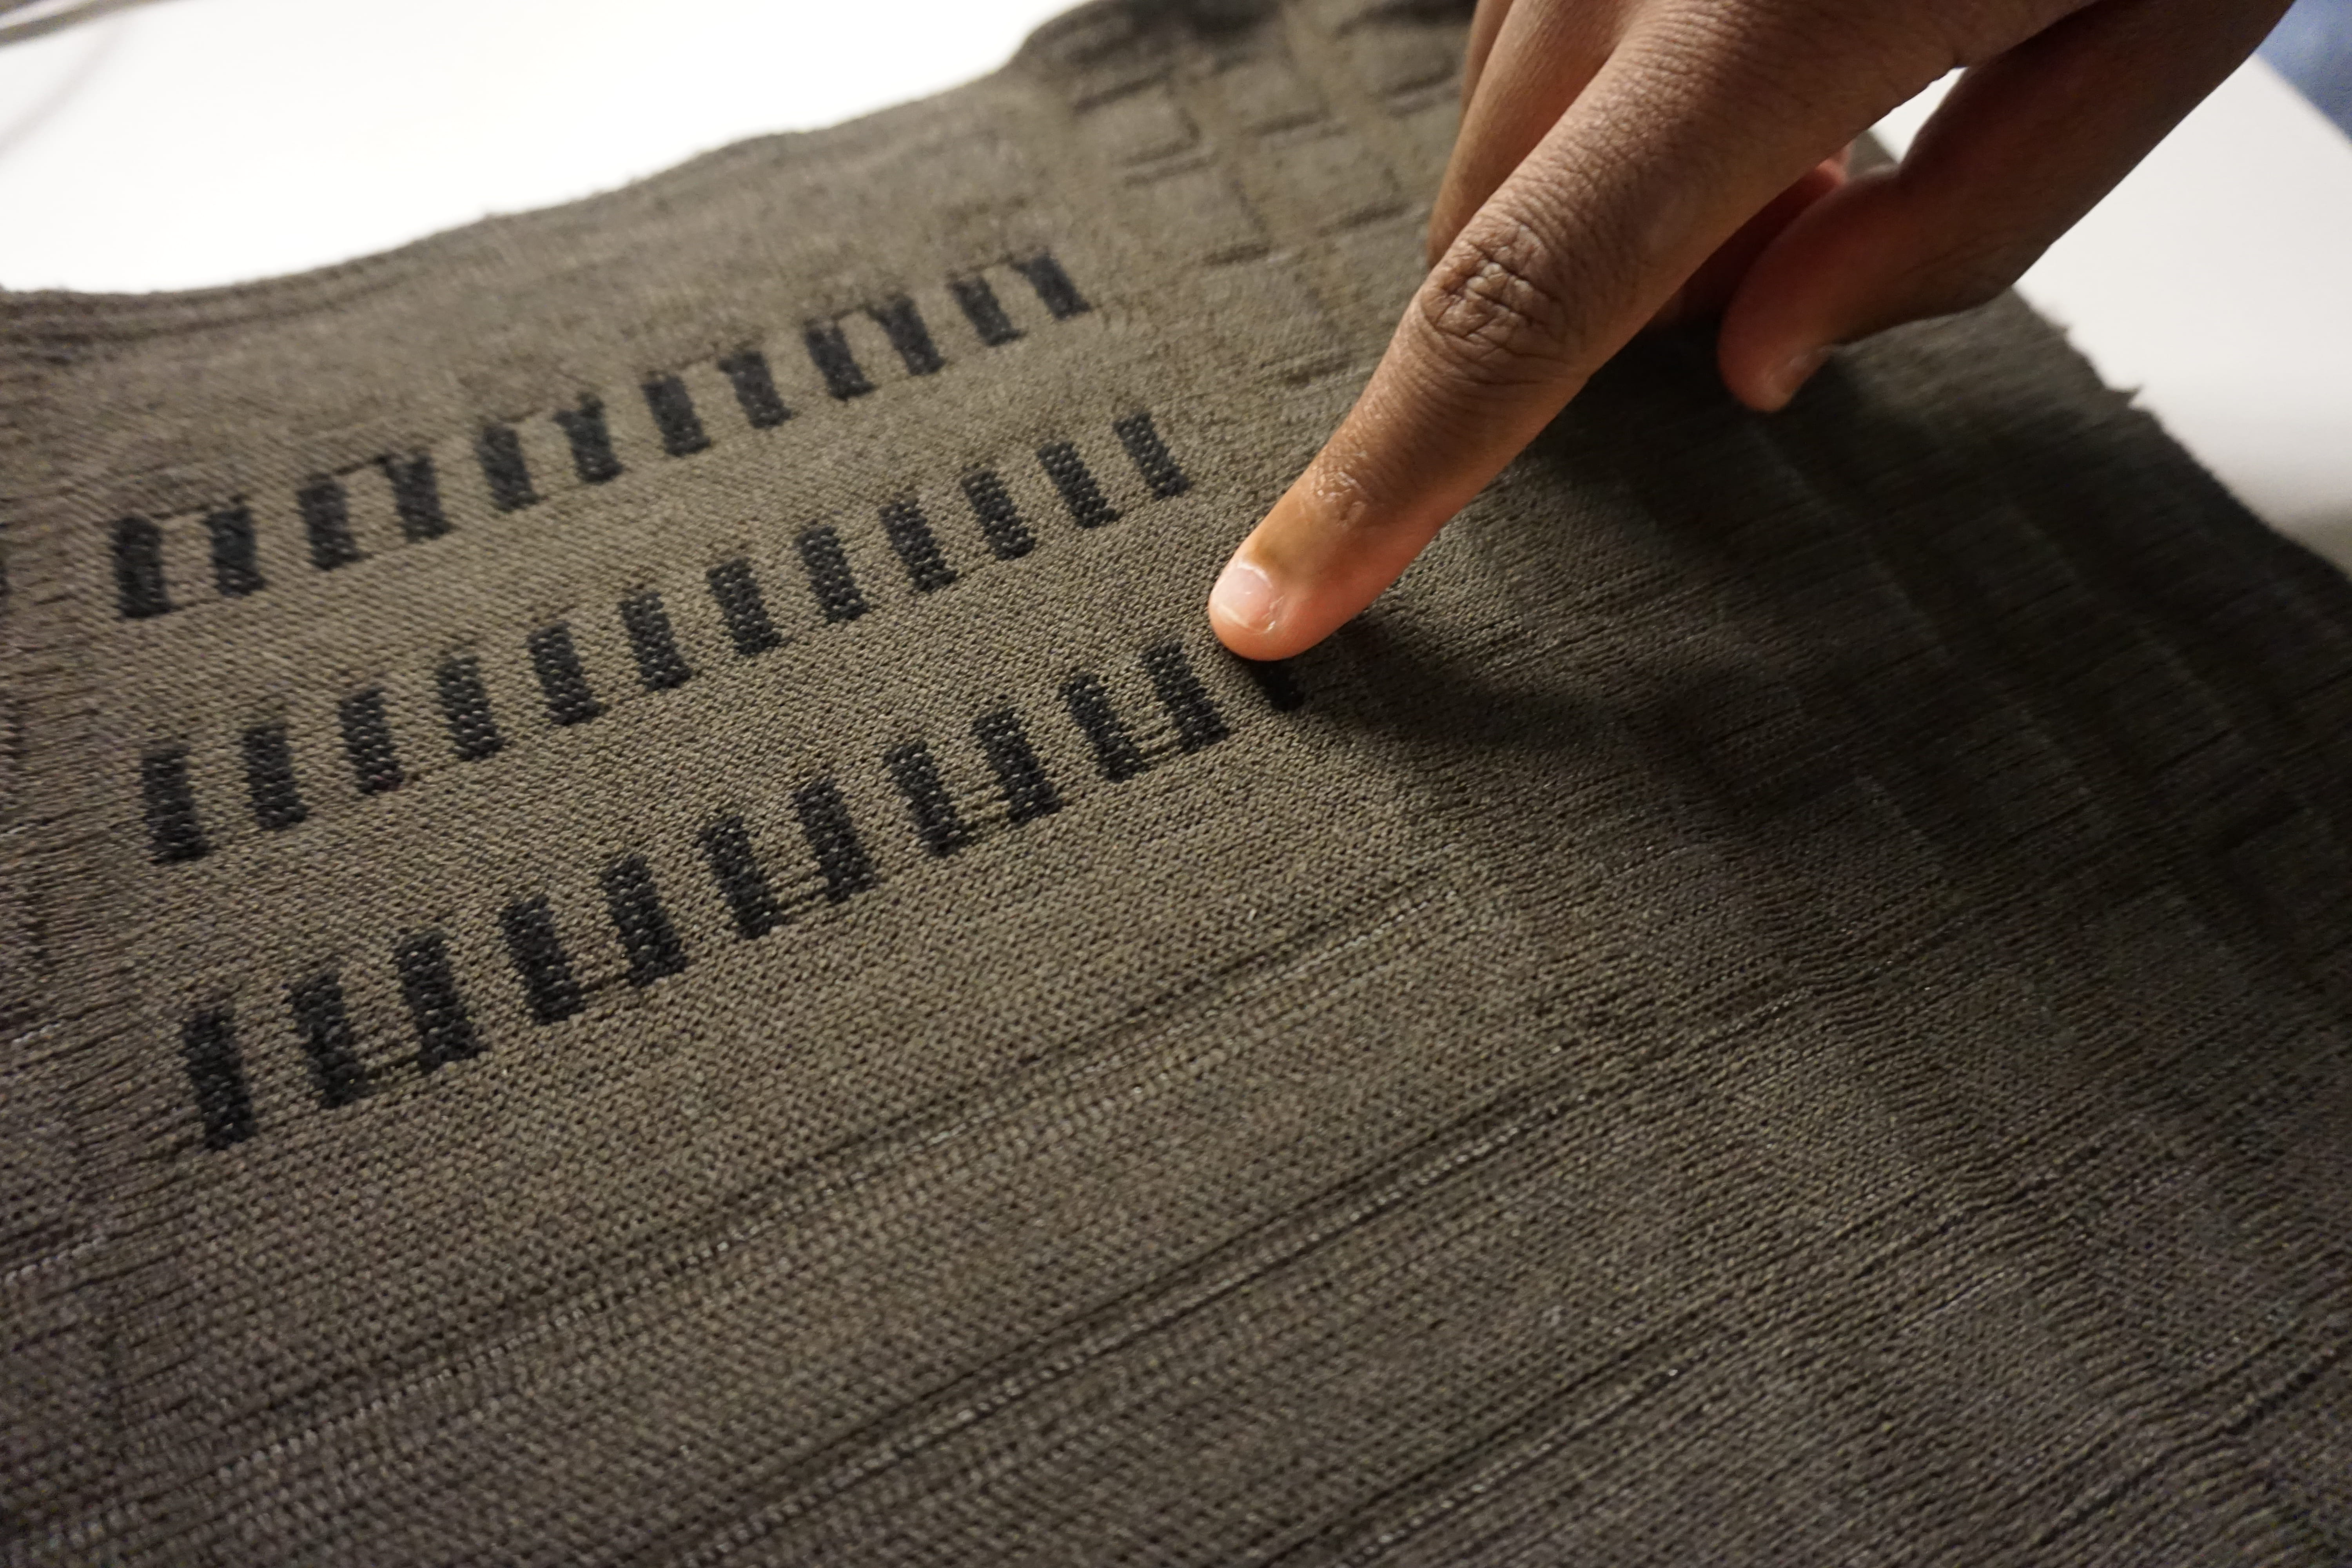 touch sensitive fabric